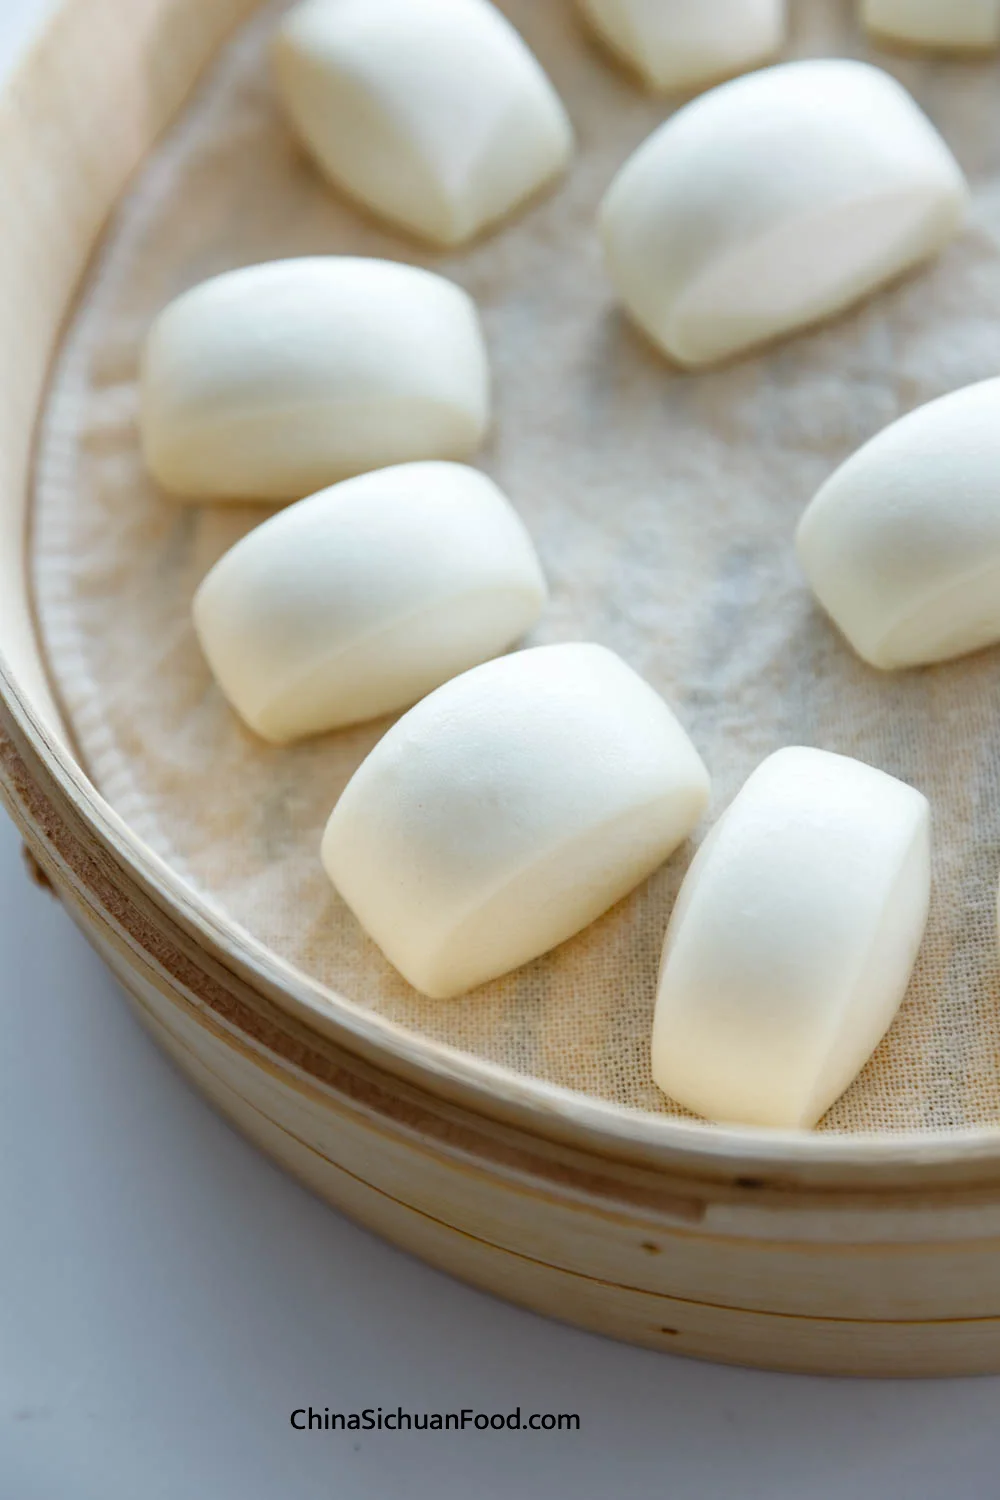 knife cut steamed buns made with single proofing method|chinasichuanfood.com